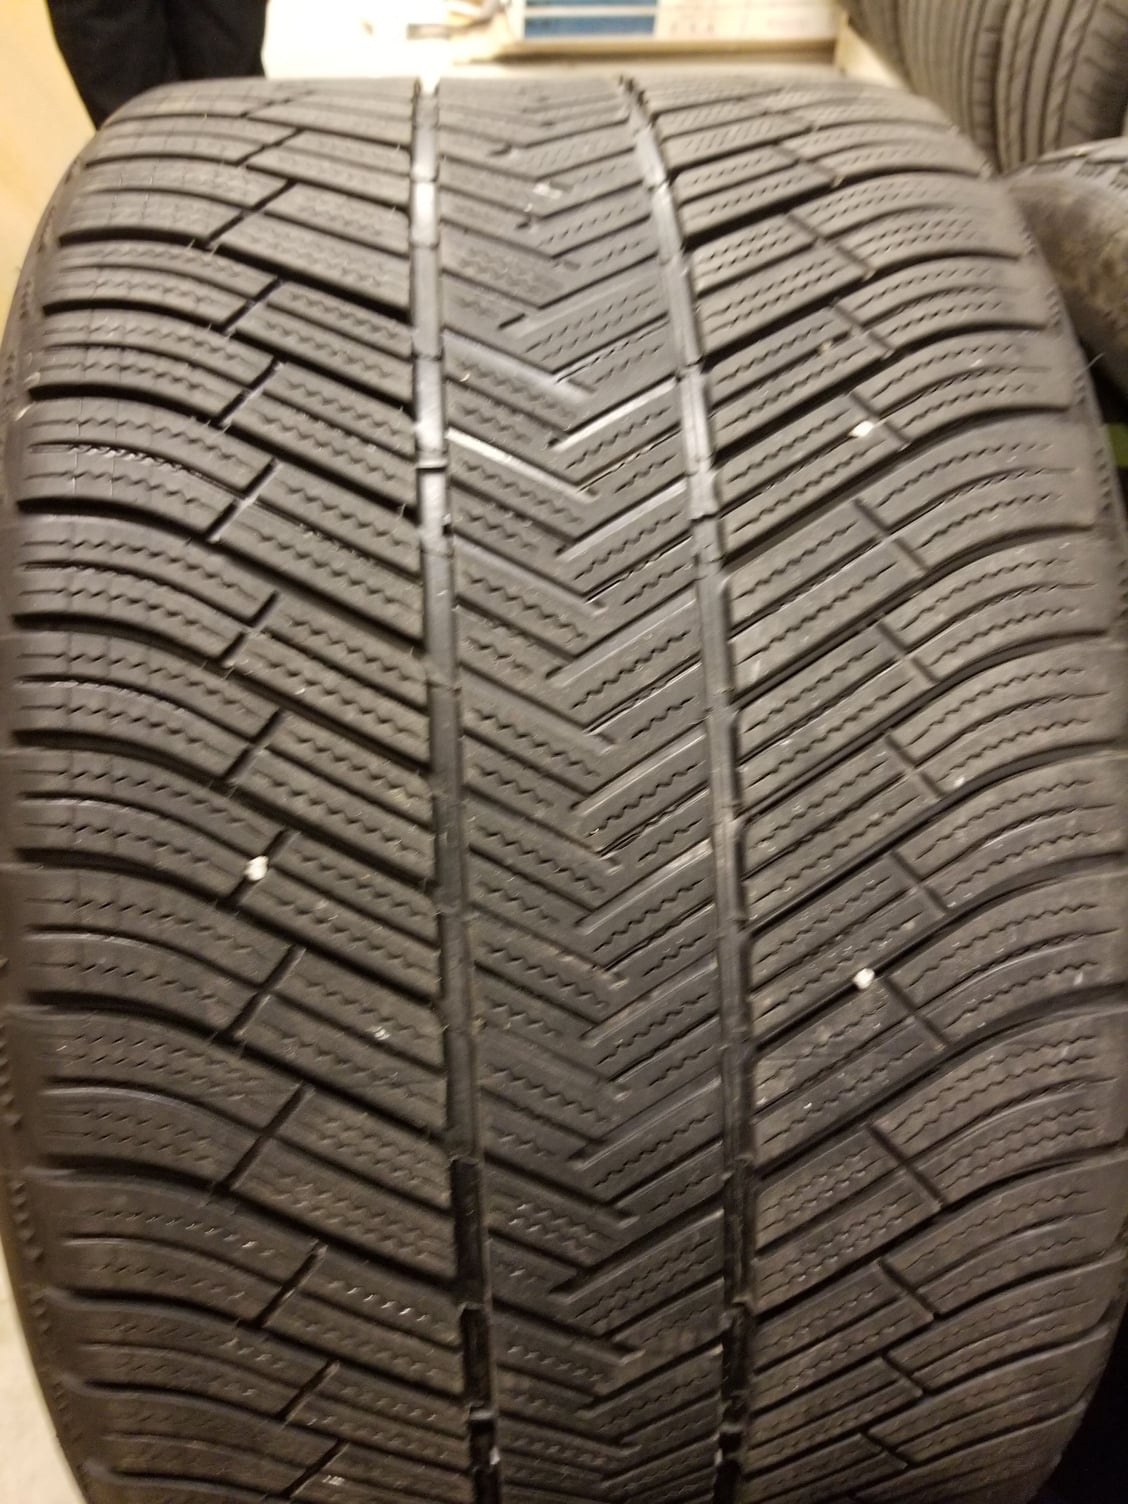 Wheels and Tires/Axles - 20" 911 SNOW TIRES - Used - 2013 to 2018 Porsche 911 - Westside Cleveland, OH 44012, United States